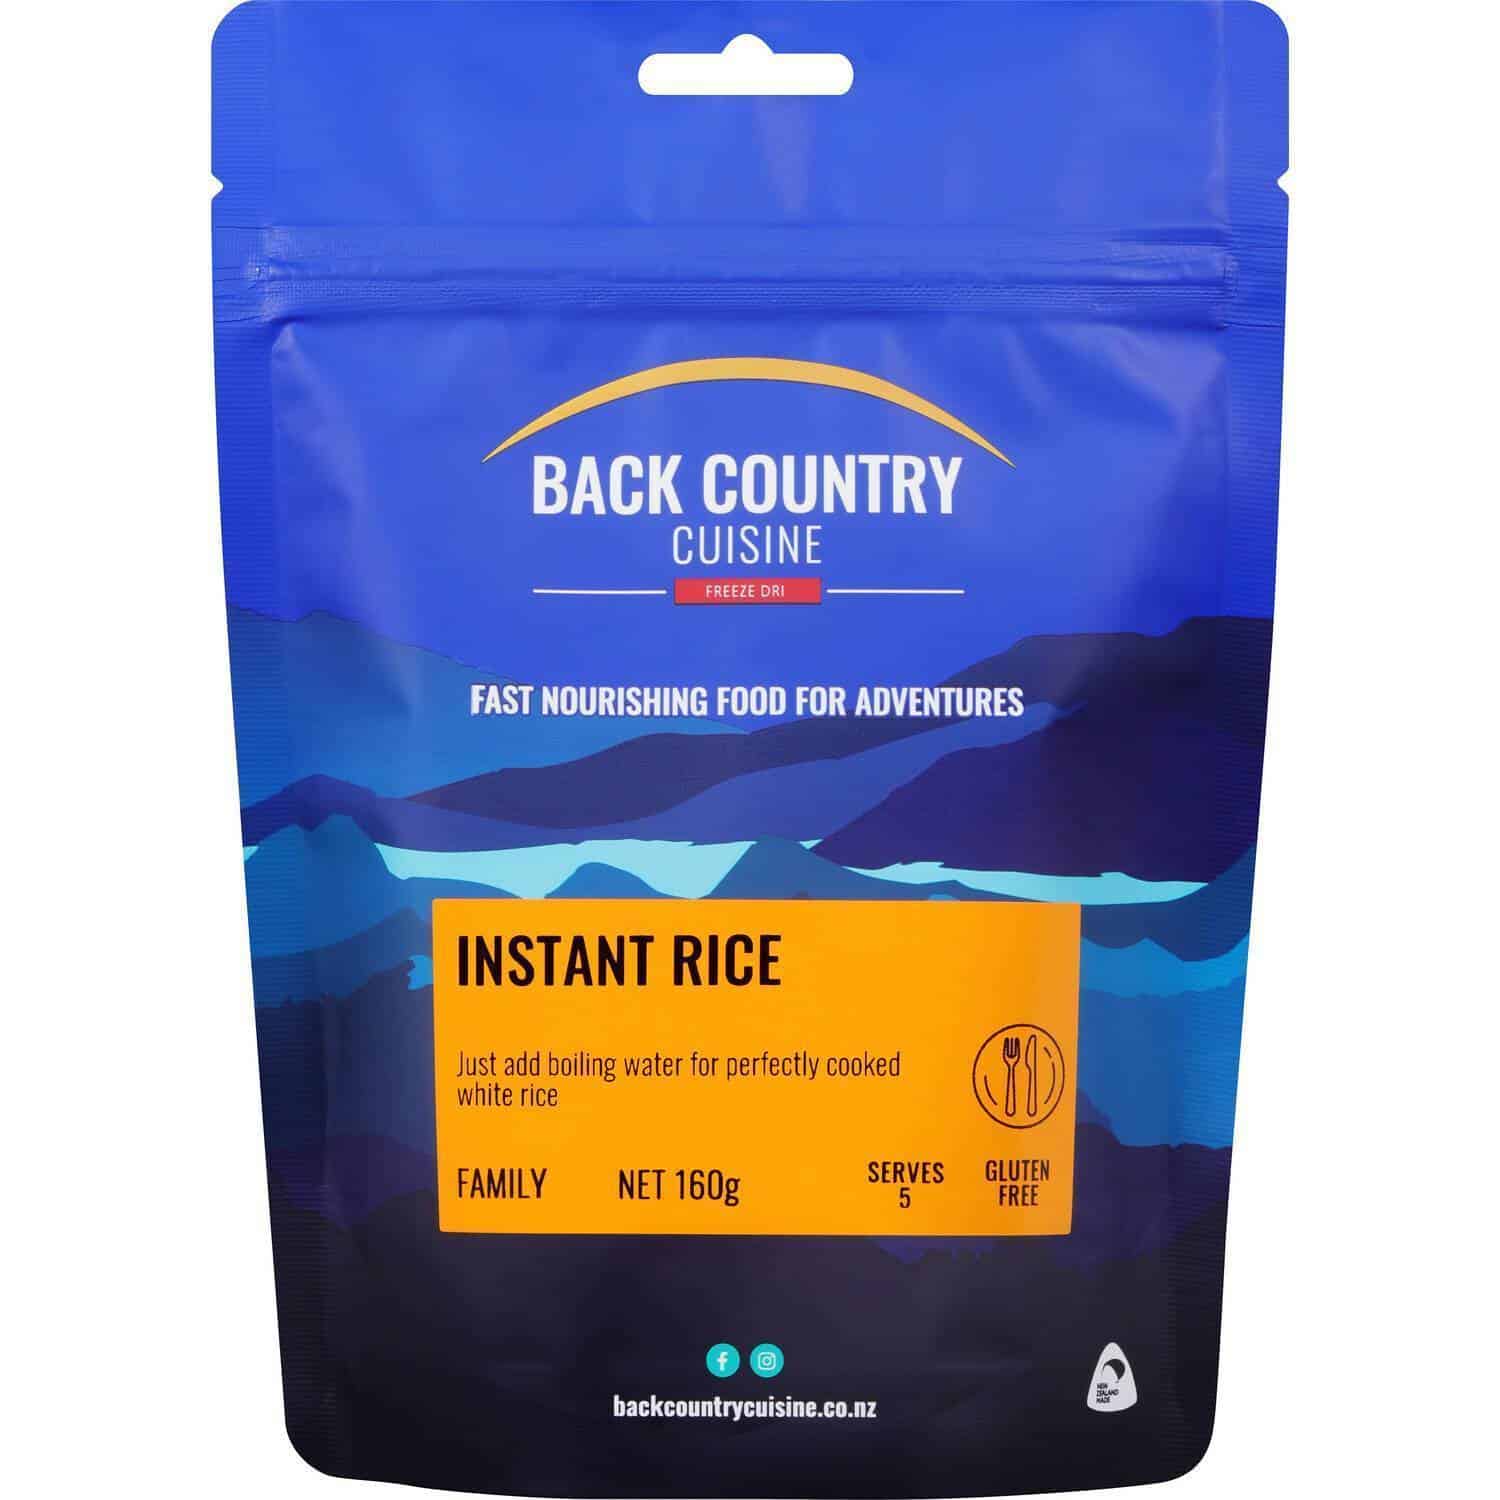 Back Country Cuisine Instant Rice - Tramping Food and Accessories sold by Venture Outdoors NZ